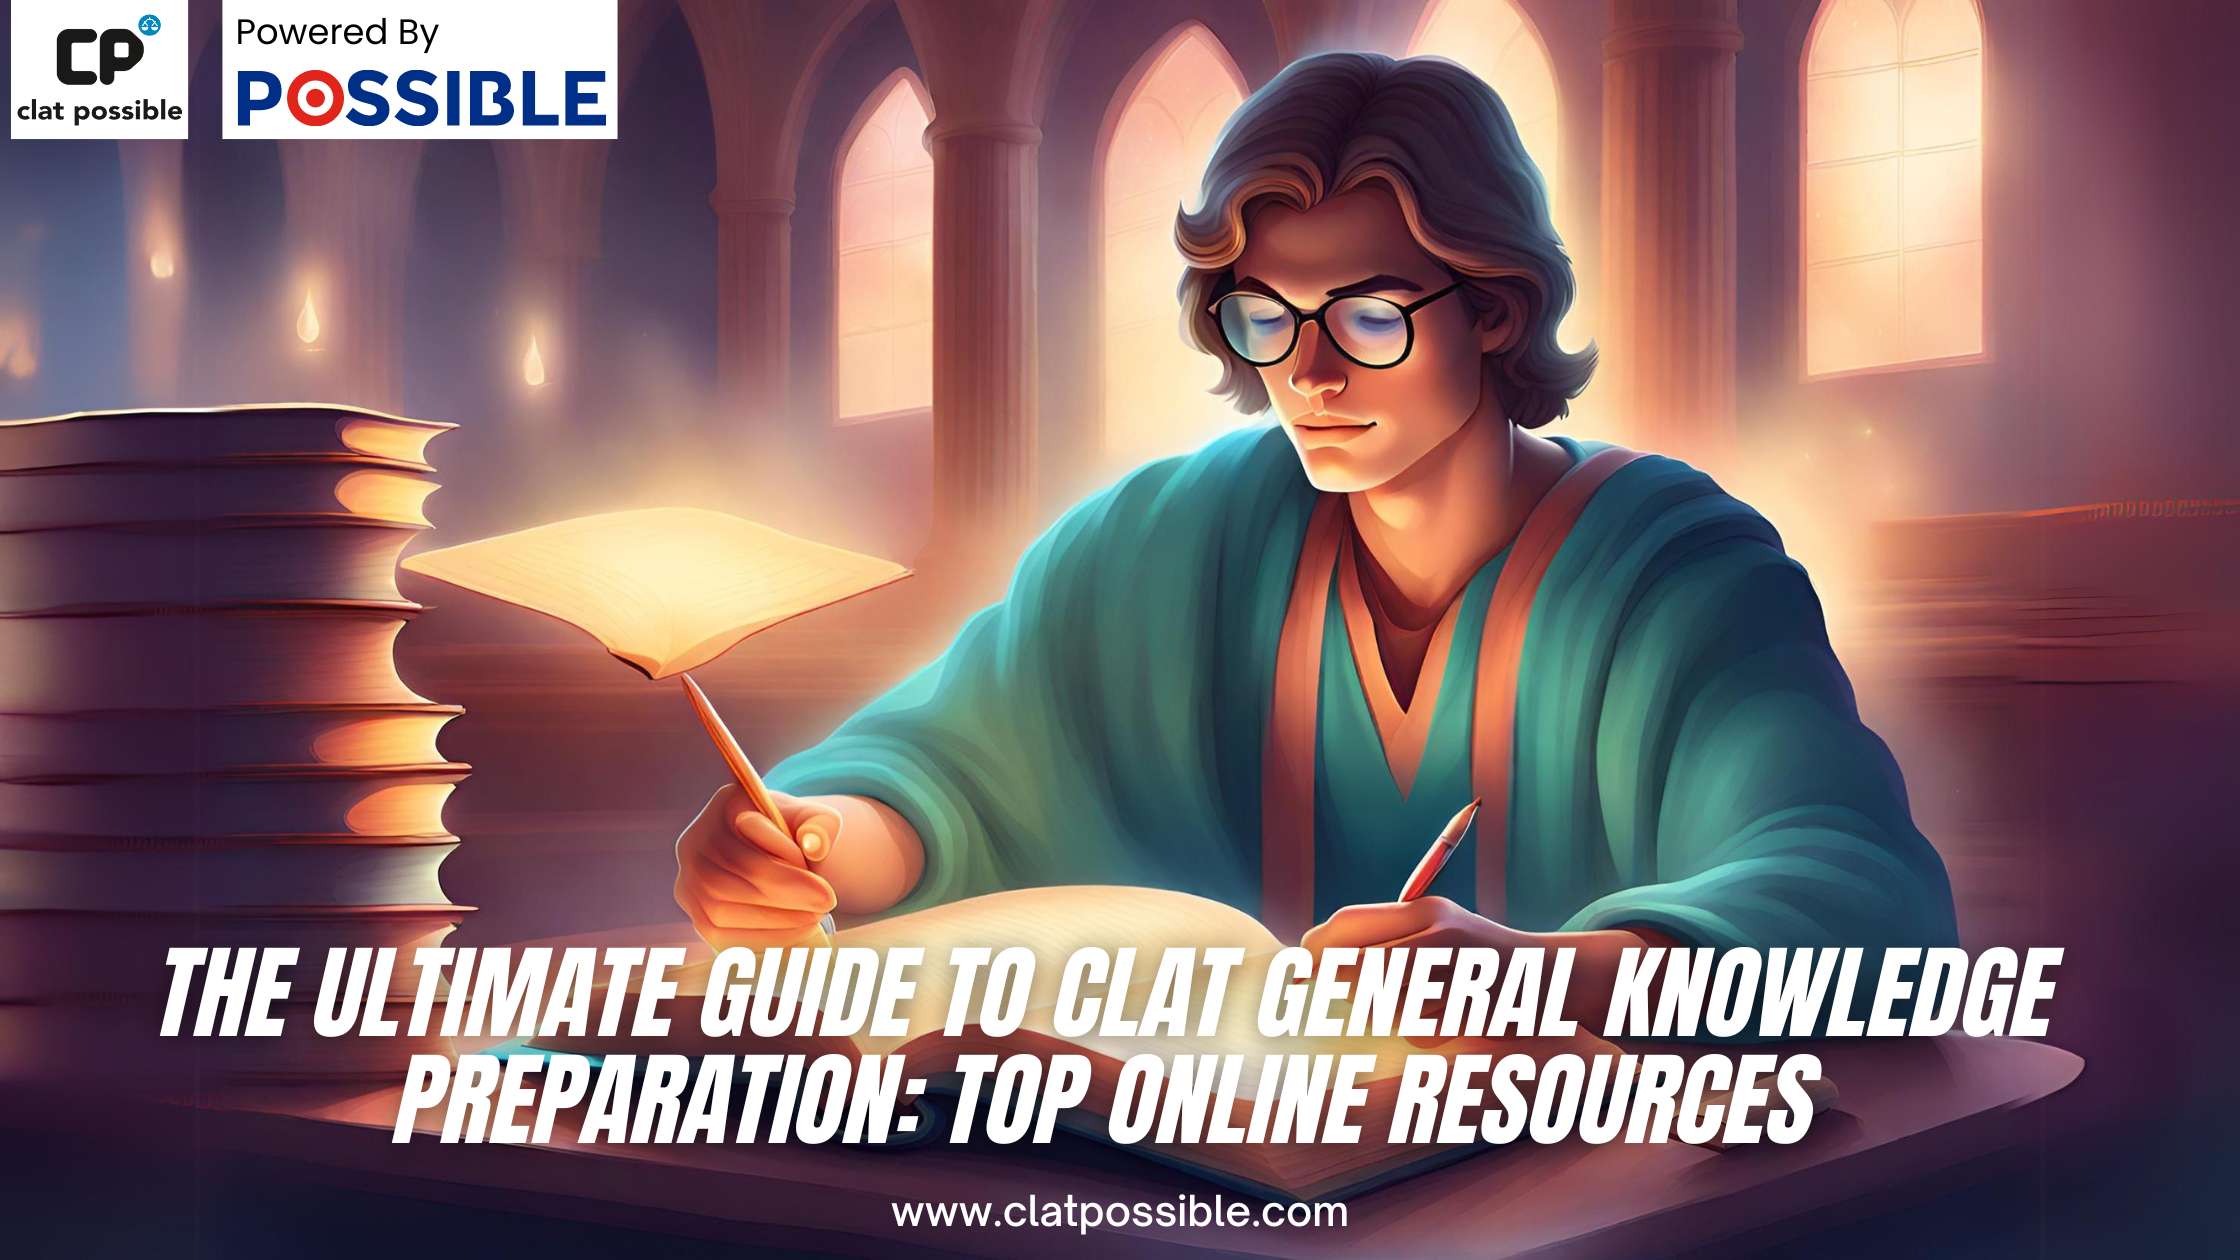 The Ultimate Guide to CLAT General Knowledge Preparation: Top Online Resources